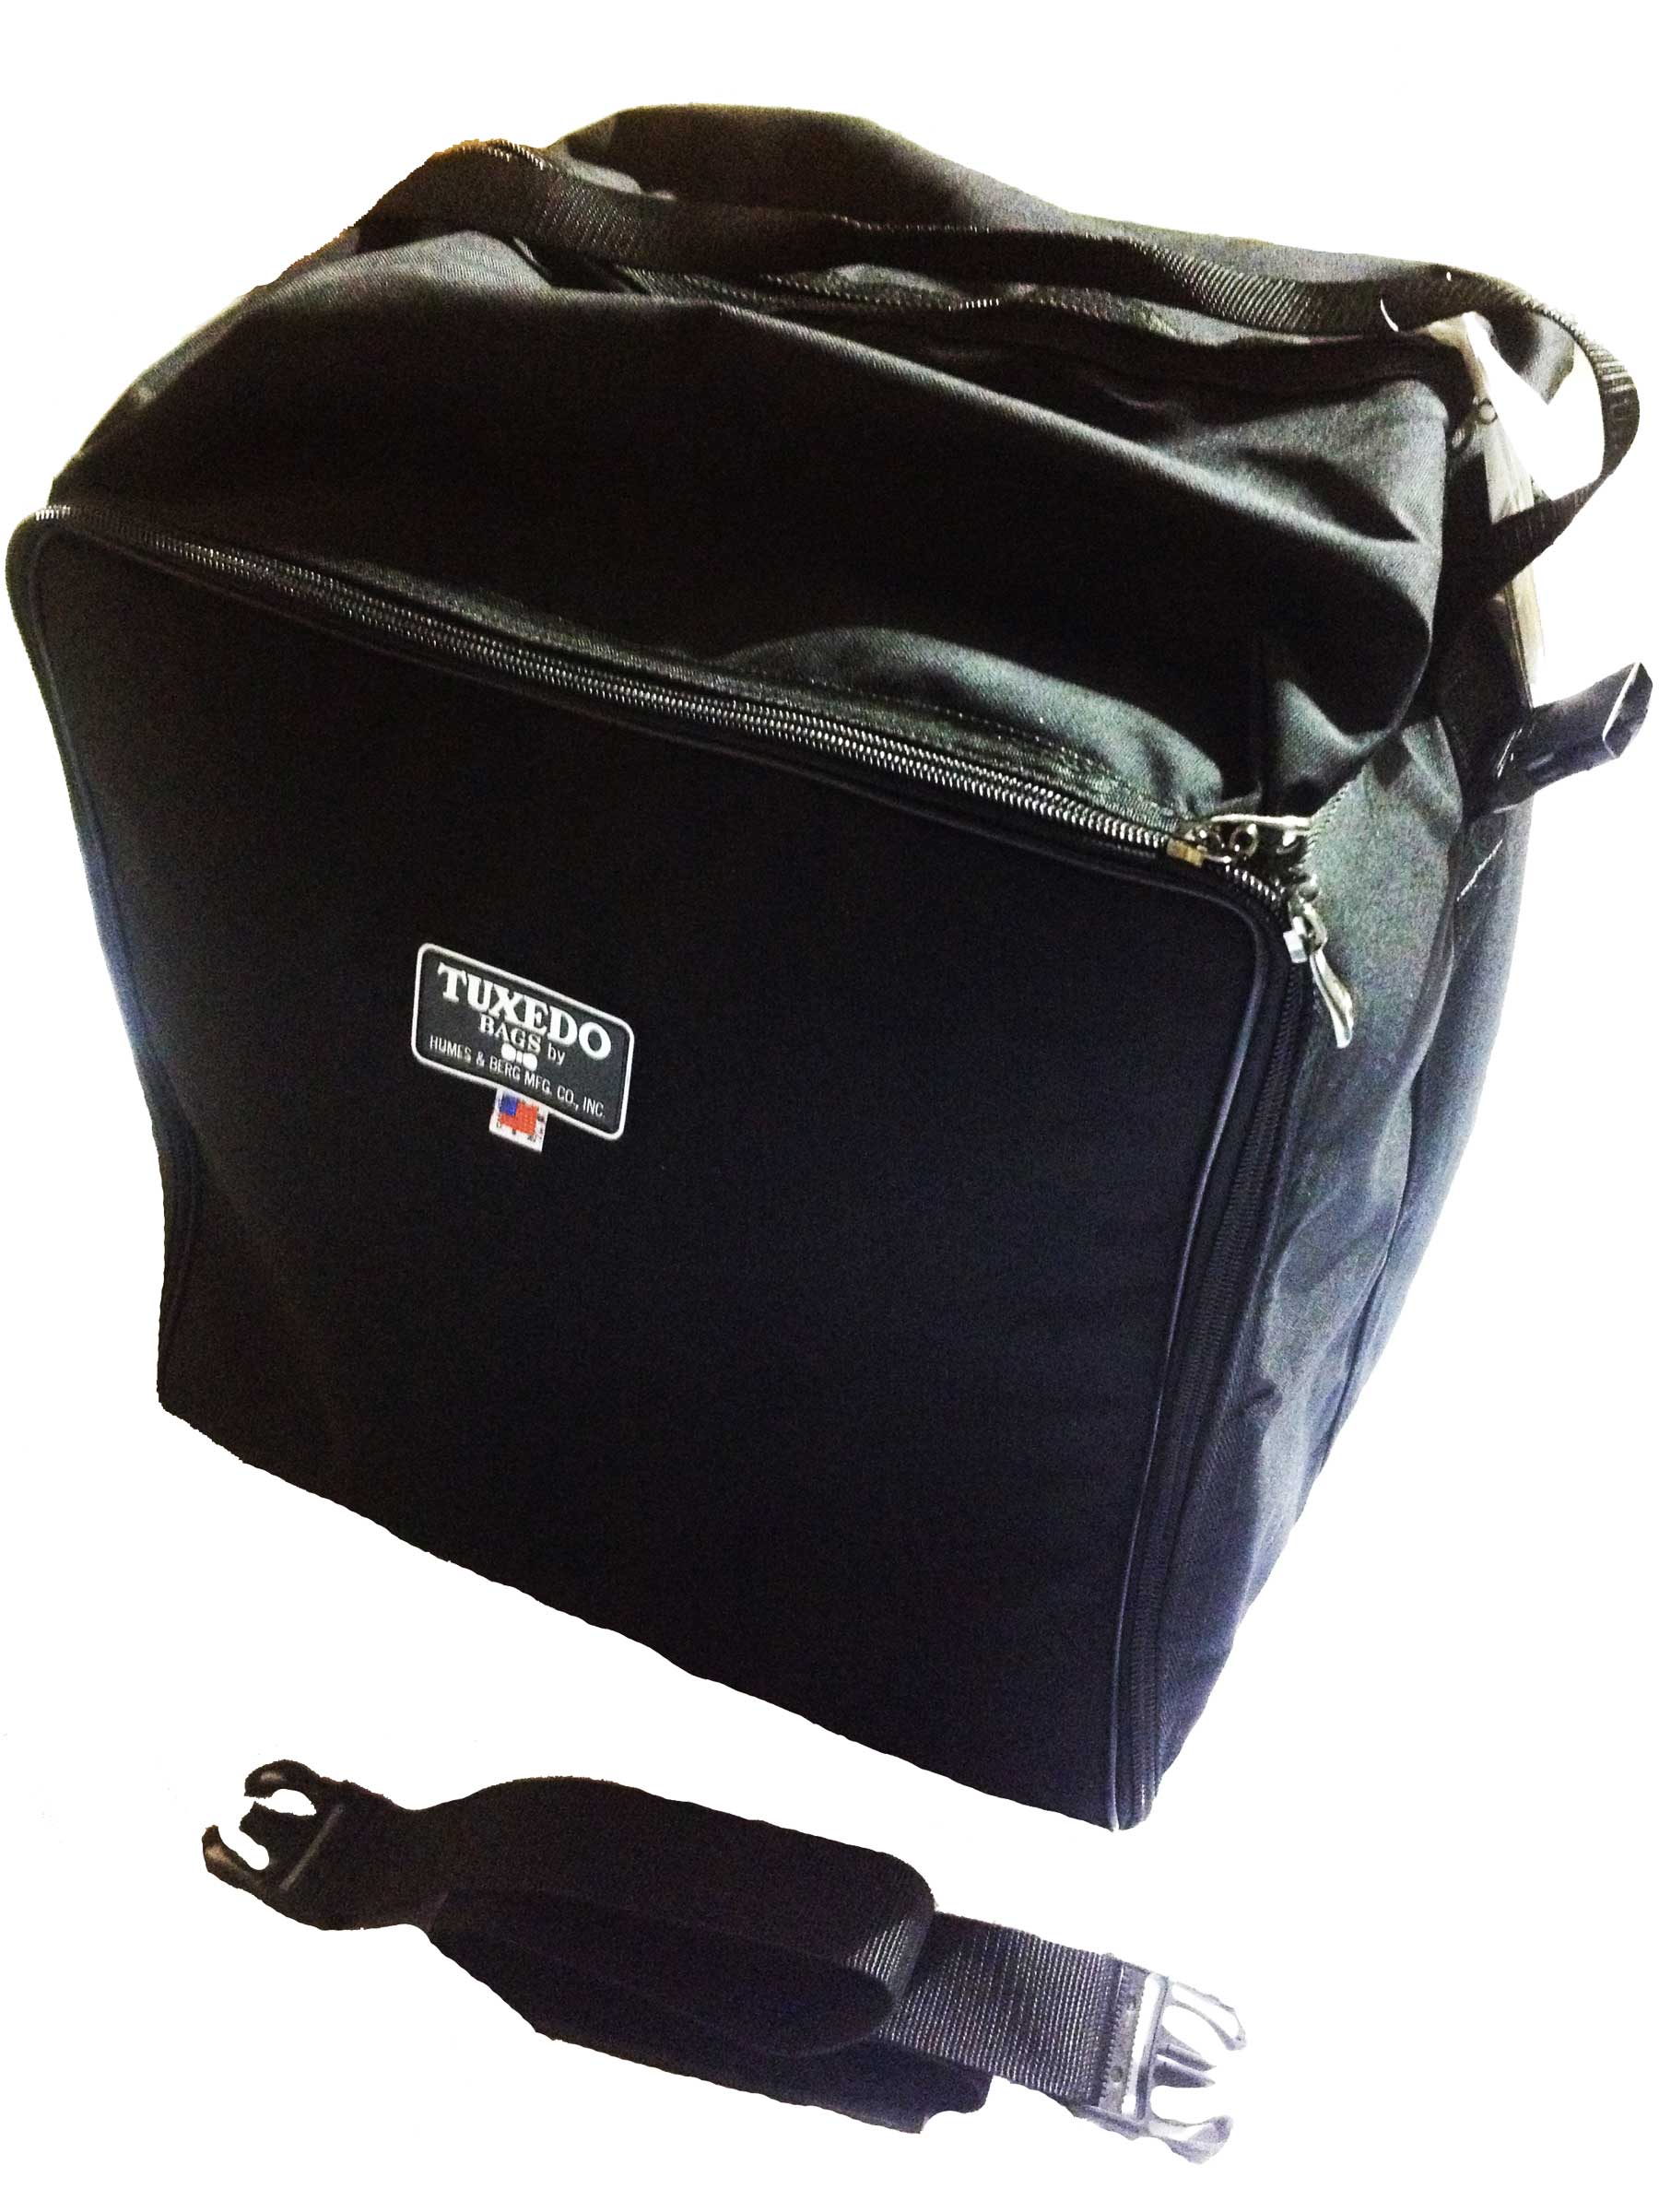 H&B Tuxedo Square 4 x 14 Inches Ext Snare Drum Bag